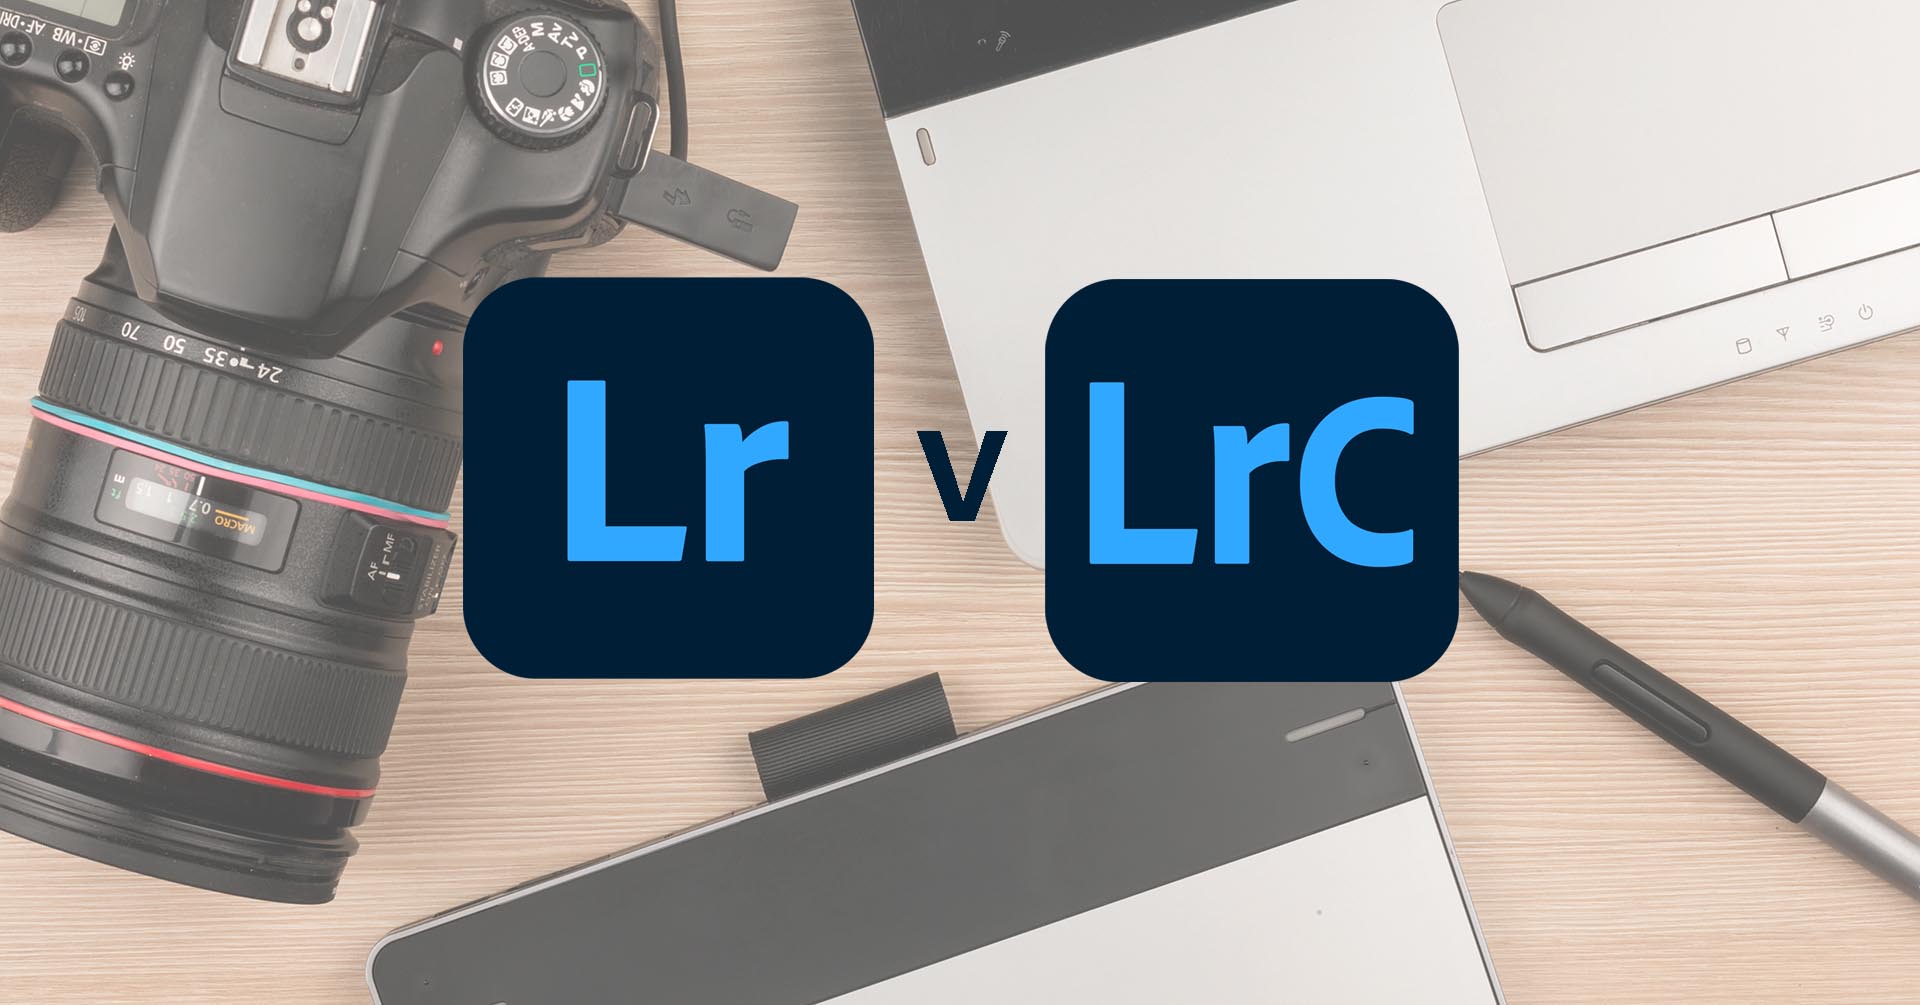 Lightroom - which version do I need?